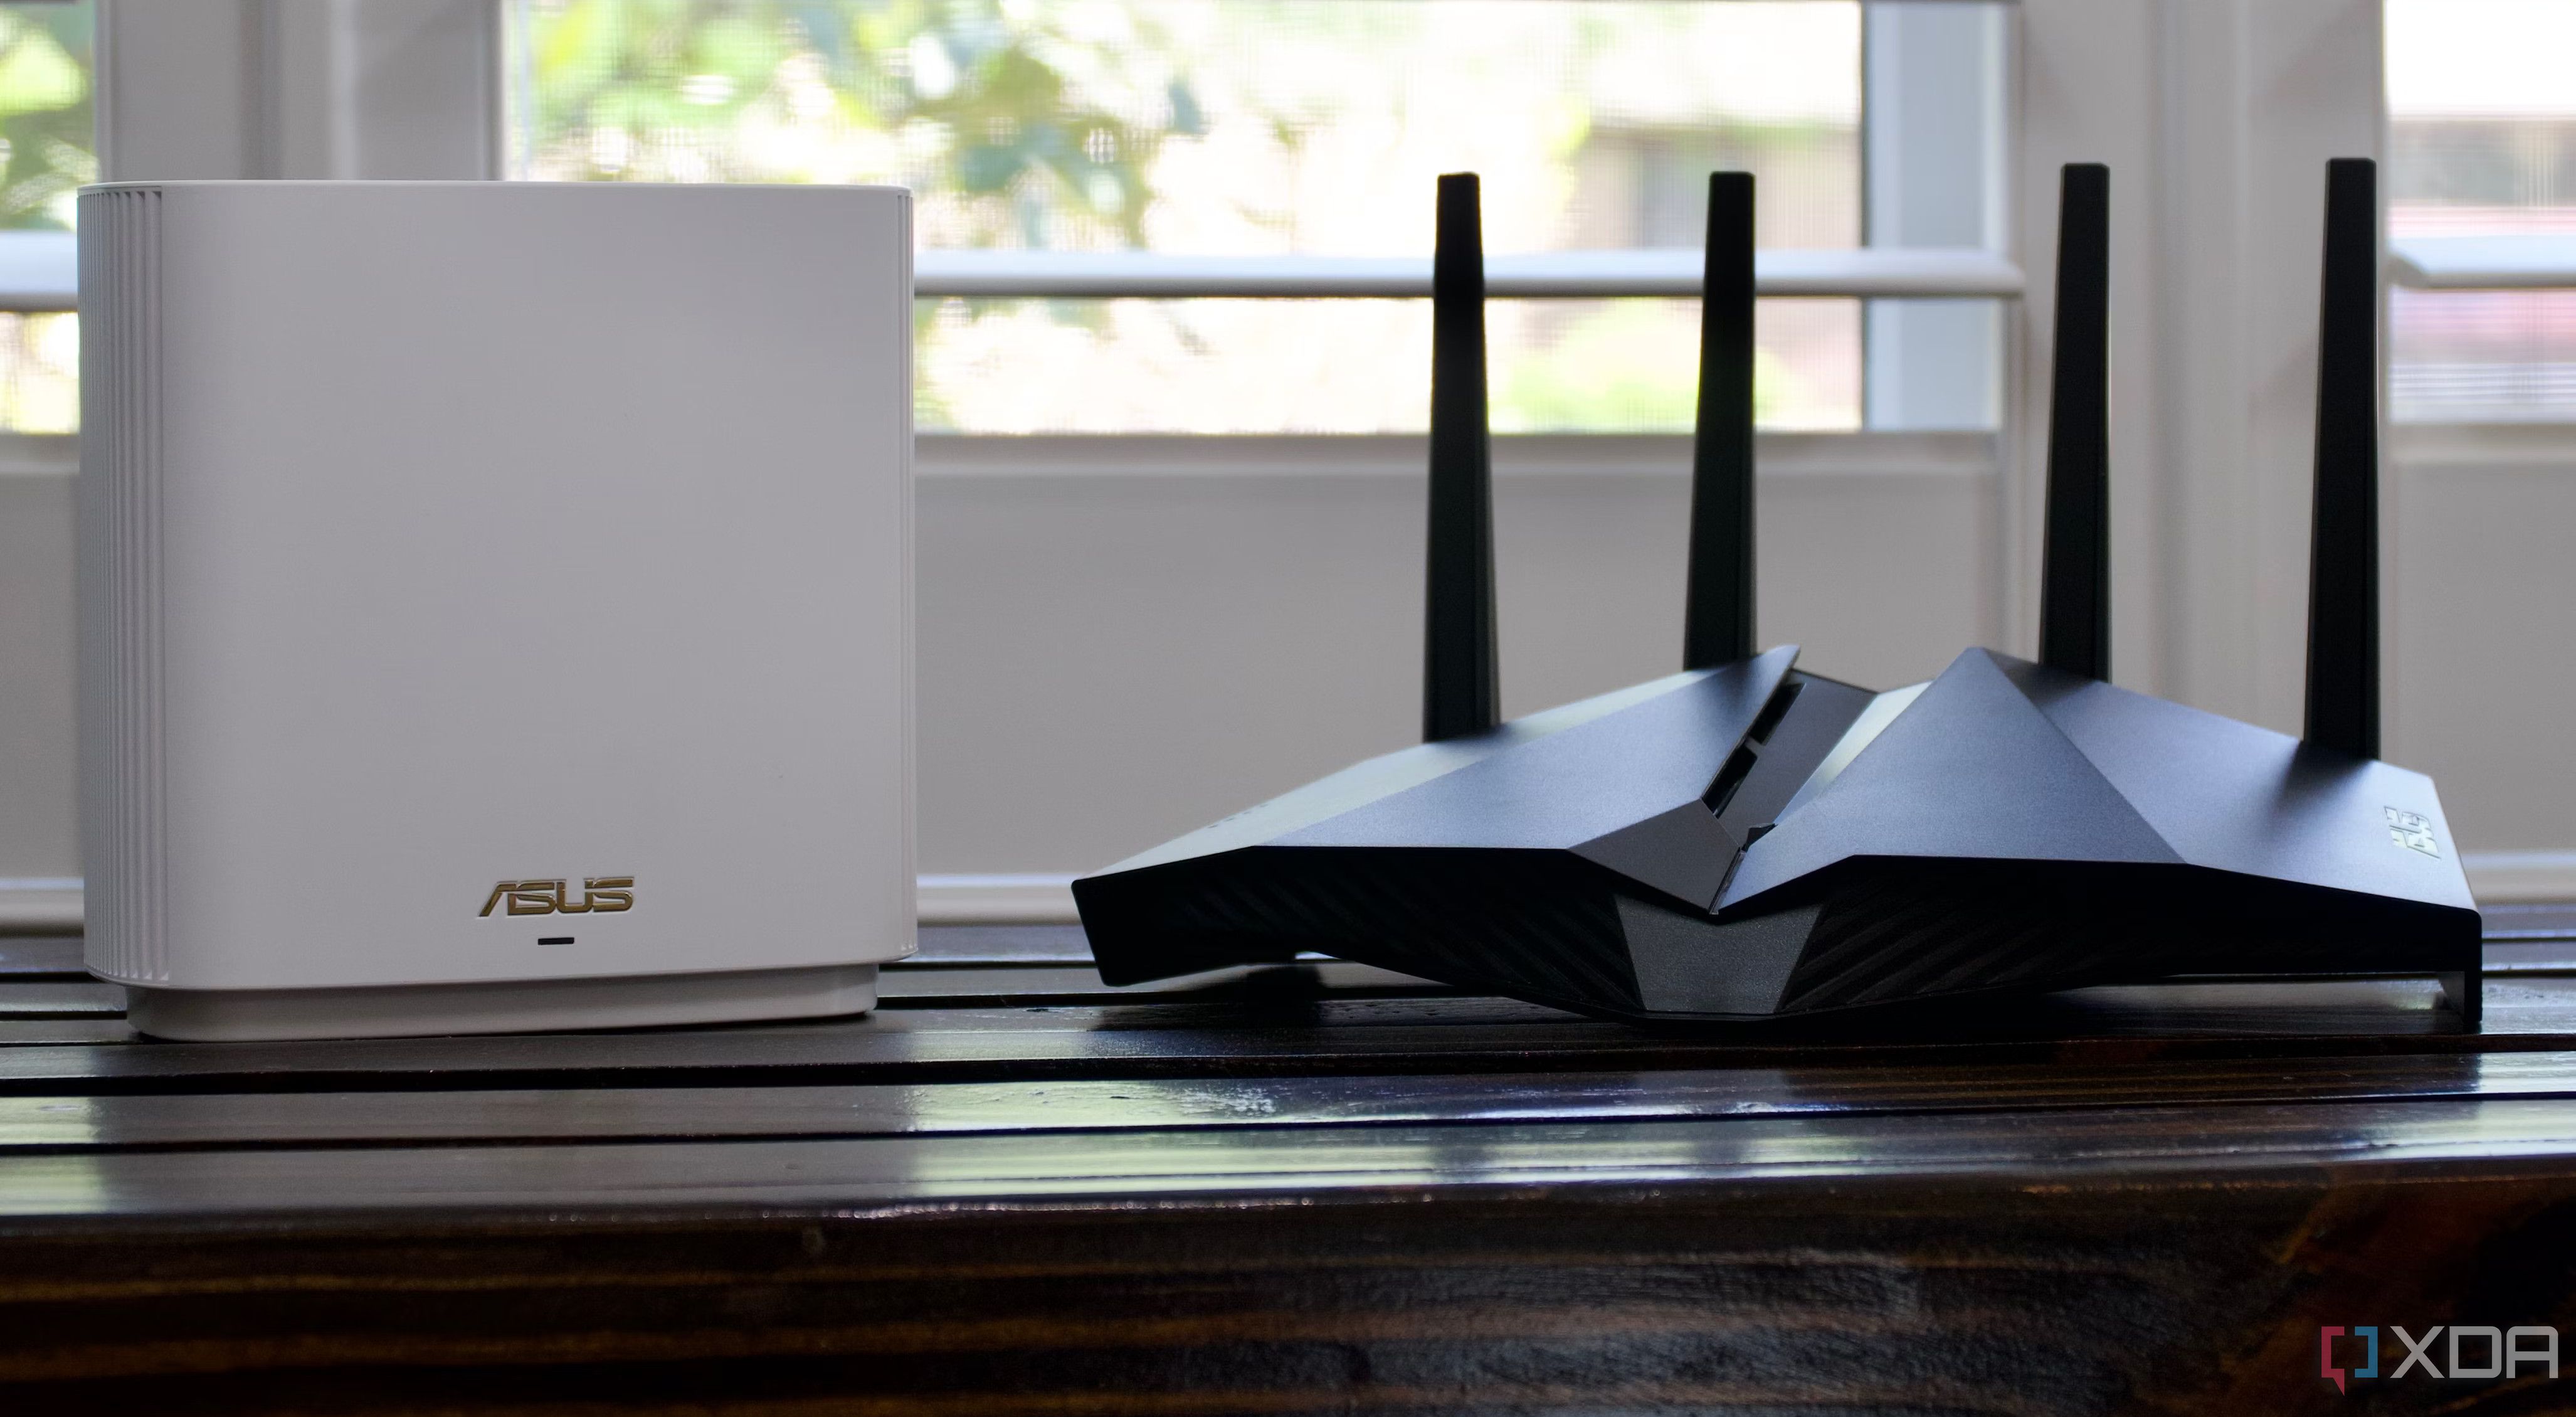 An image of an Asus ZenWifi gaming Router